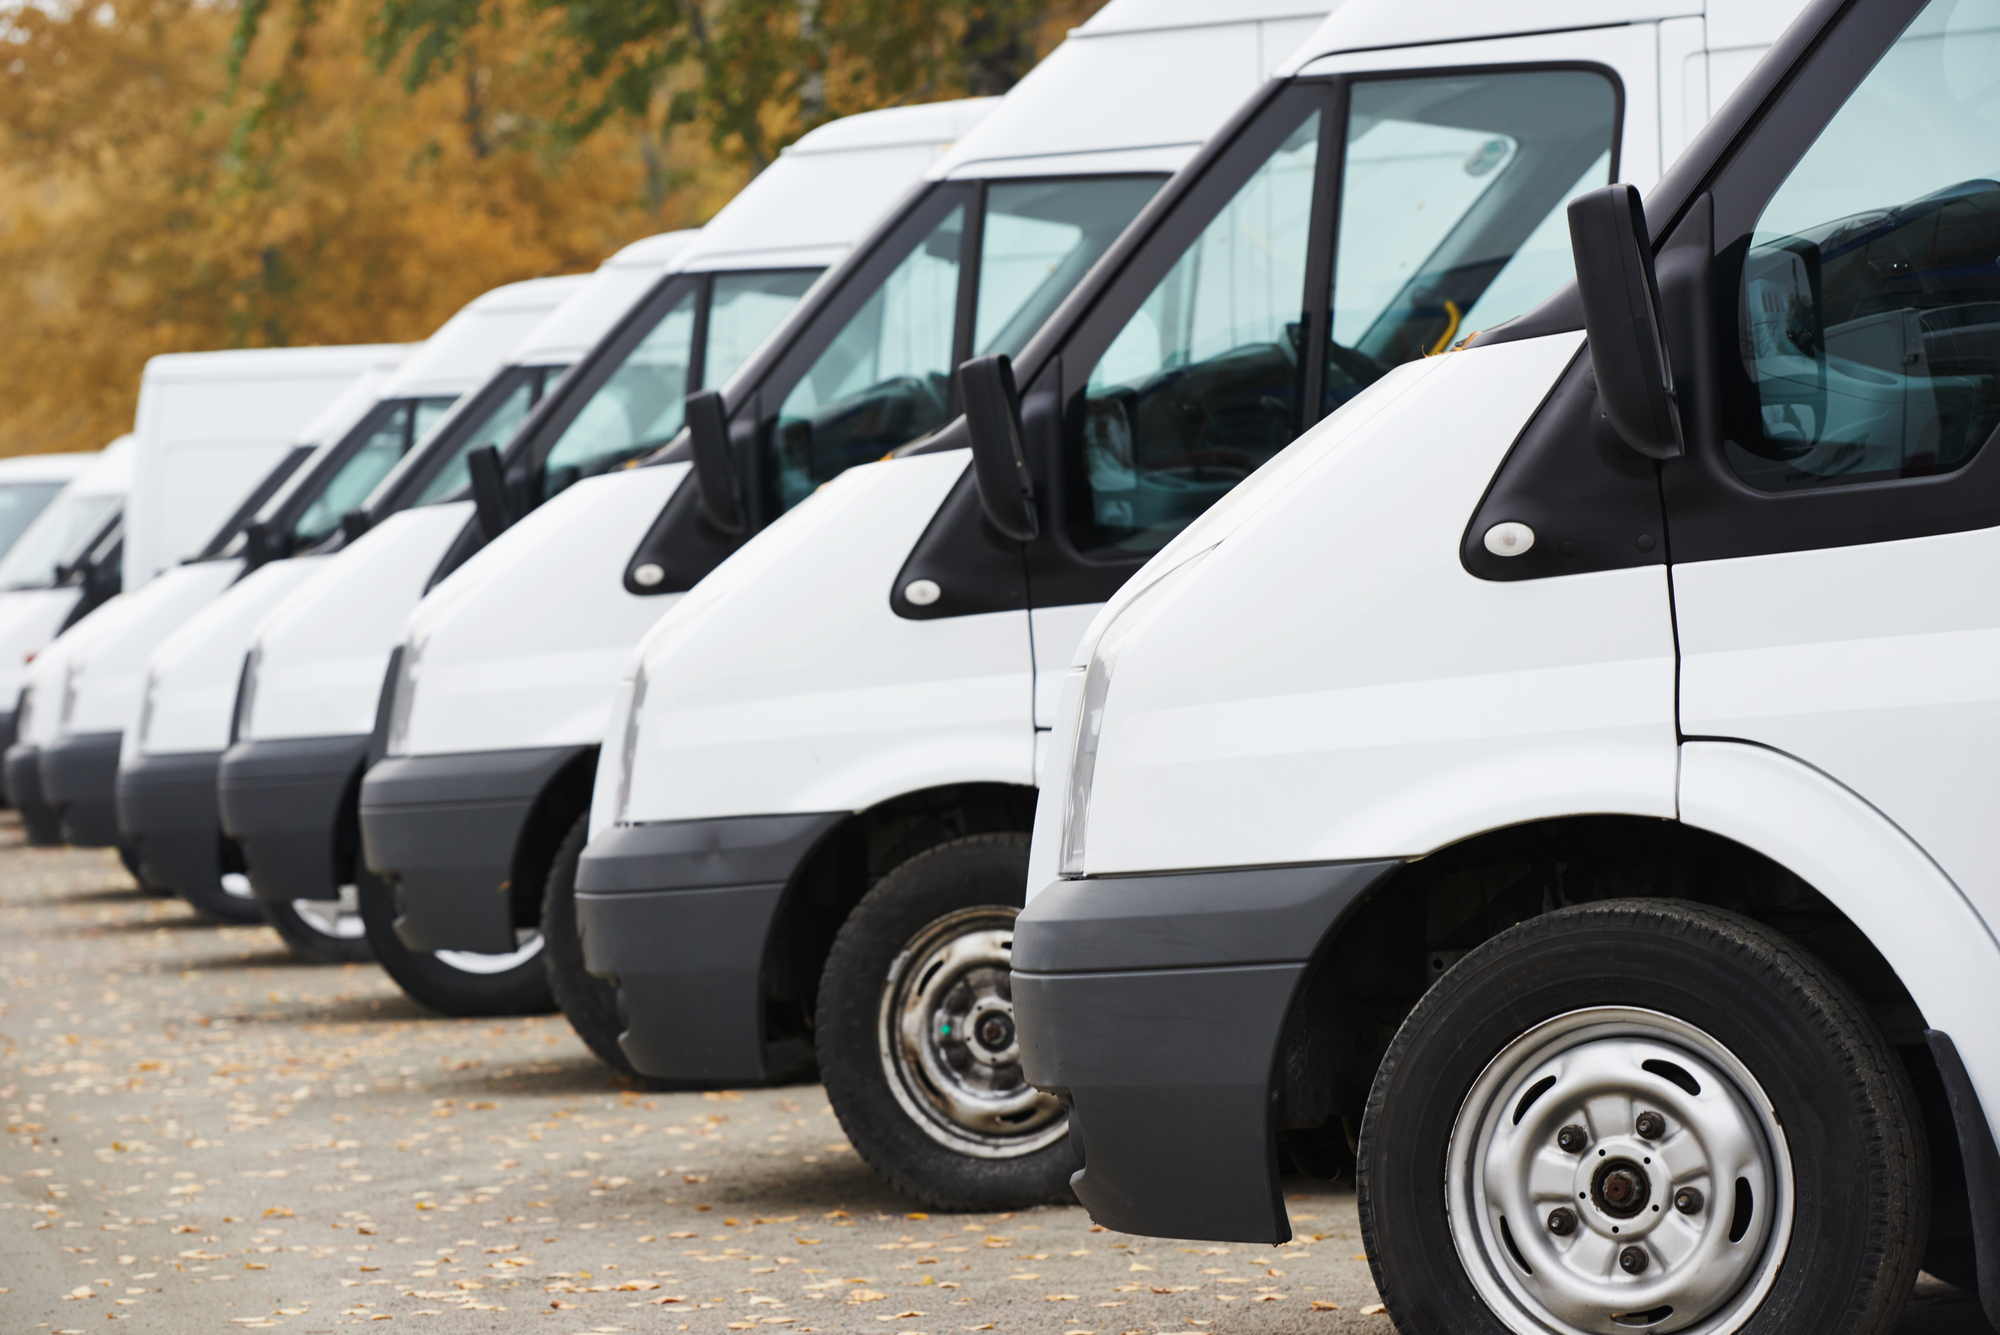 A row of parked white commercial vans.